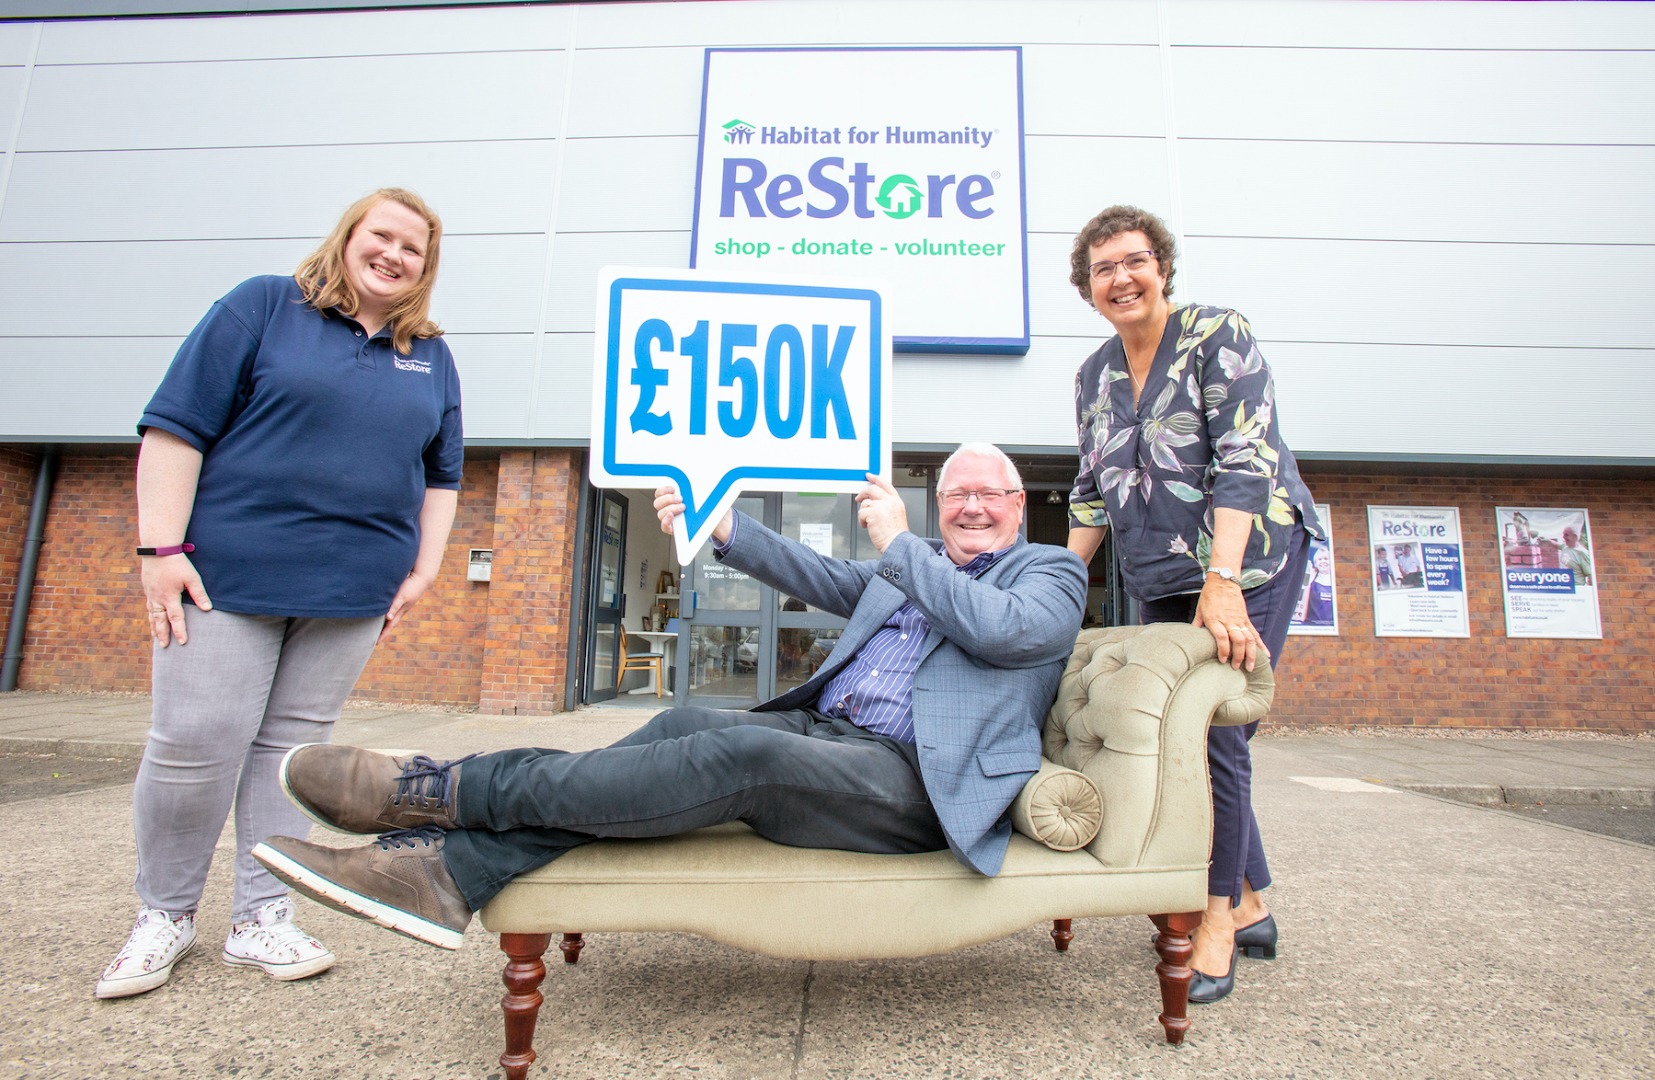 Staff from Habitat and the Gallaher Trust pose for a photo. One man is sitting on a chaise lounge, holding a sign showing a speech bubble with "£150k" written on it. The group are posing in front of the ReStore in Ballymena